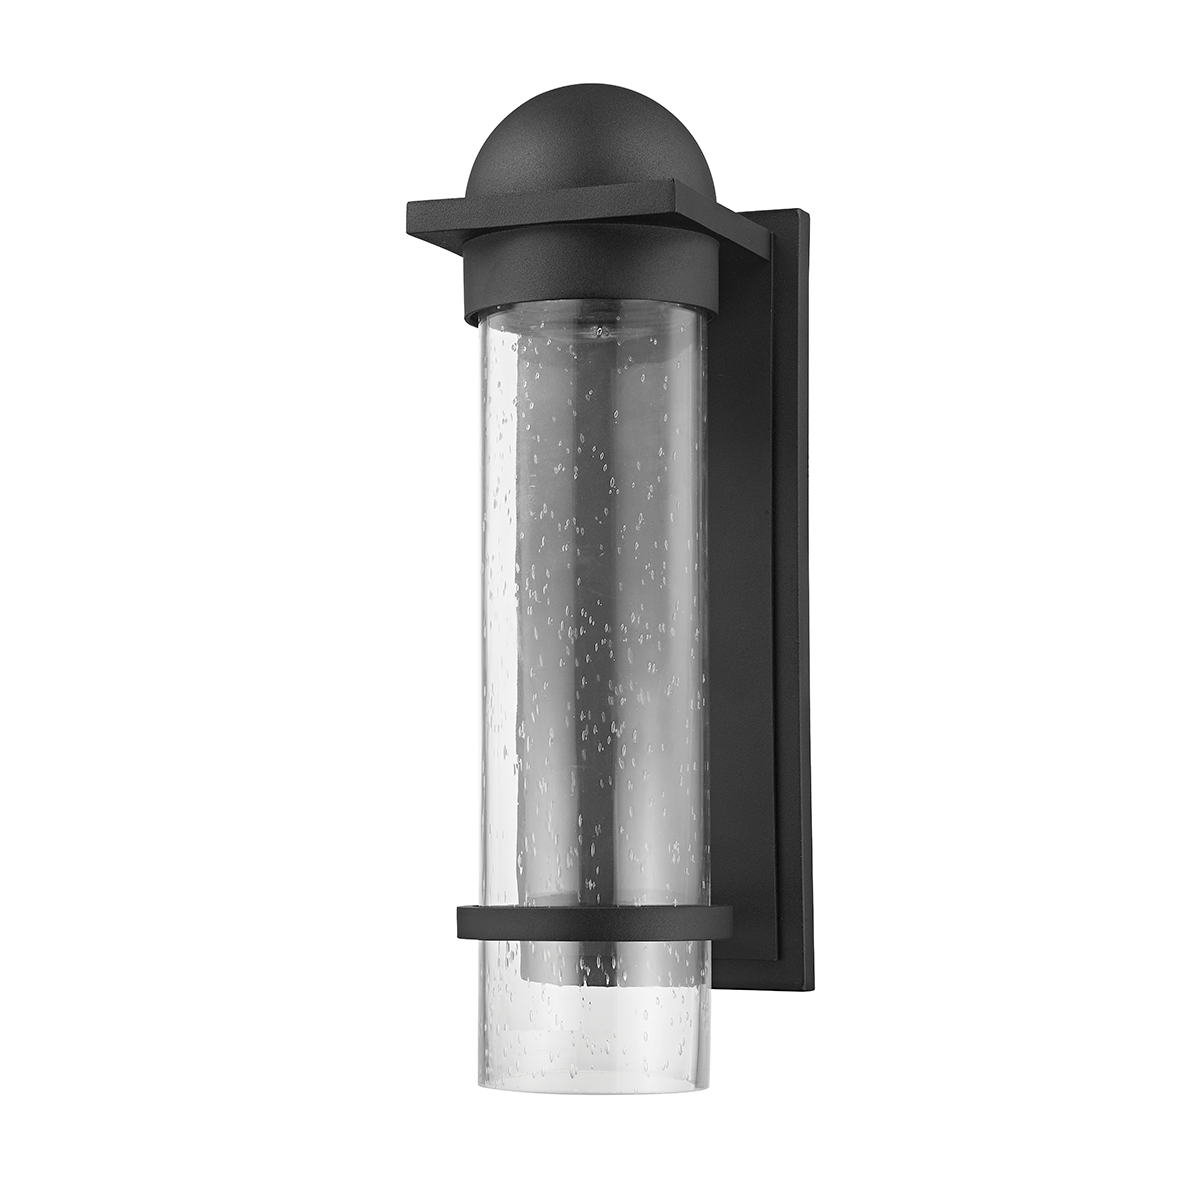 Troy Lighting 1 LIGHT LARGE EXTERIOR WALL SCONCE B7116 Outdoor l Wall Troy Lighting TEXTURE BLACK  